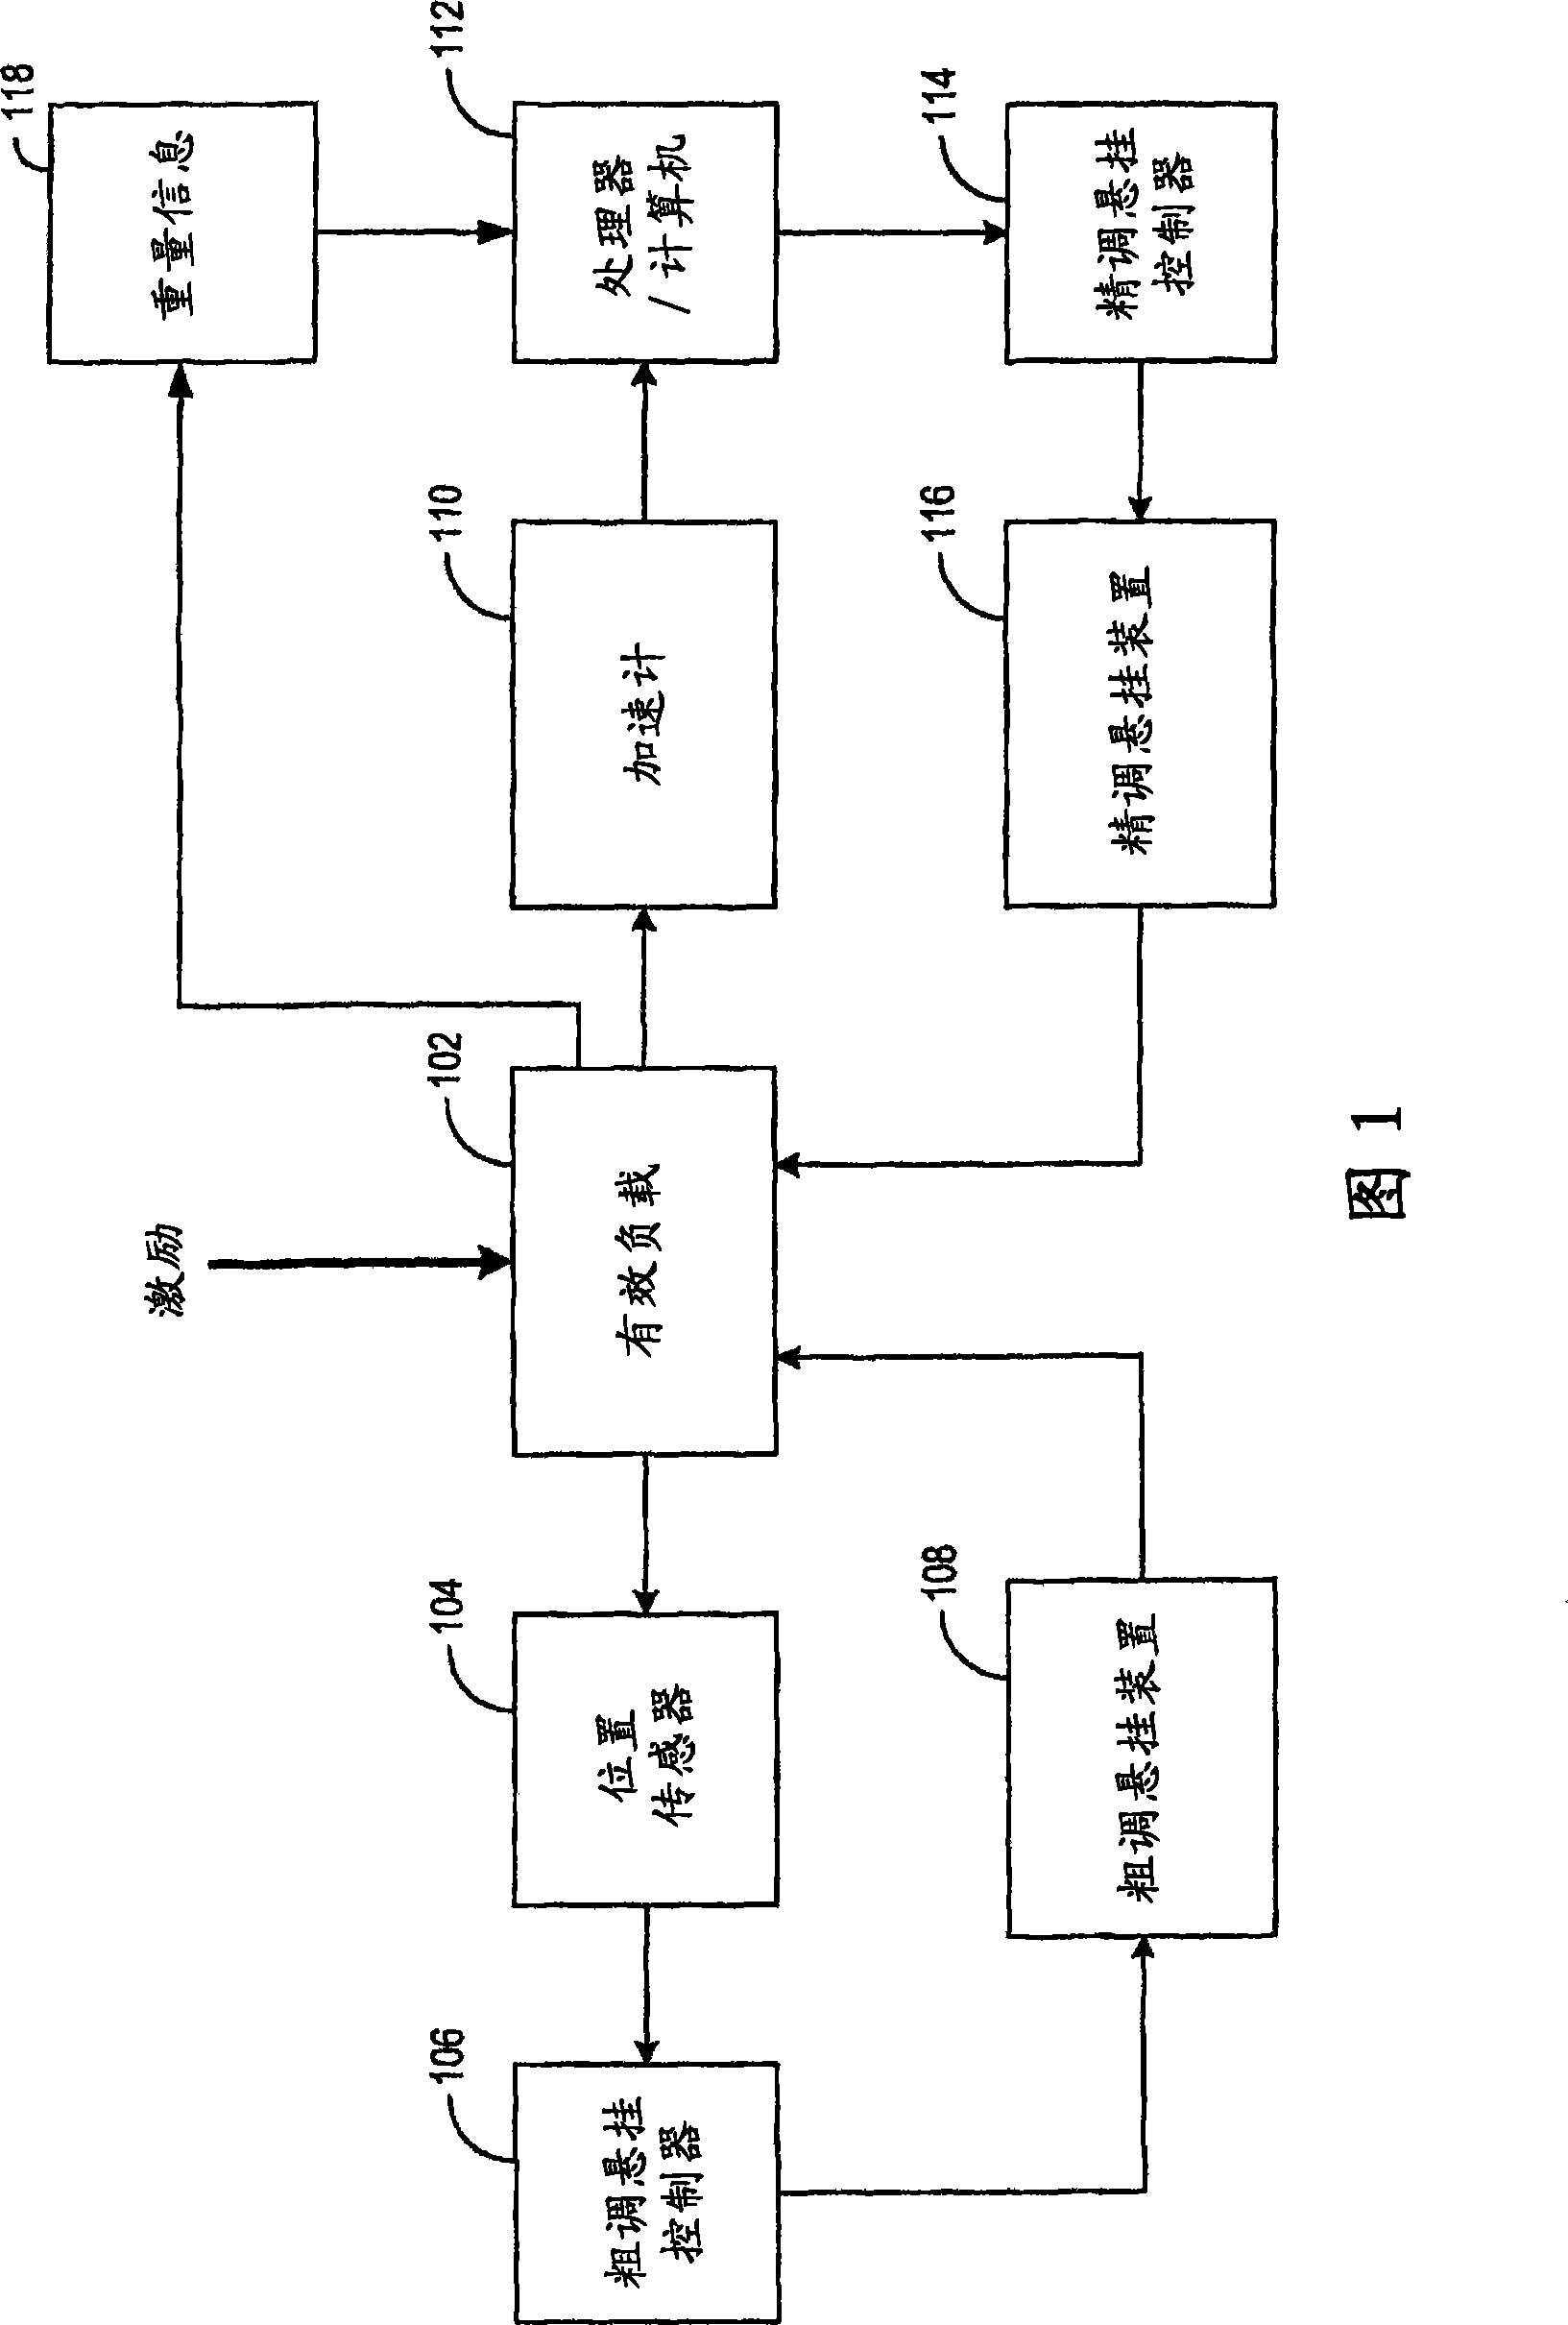 Method and apparatus for an adaptive suspension support system